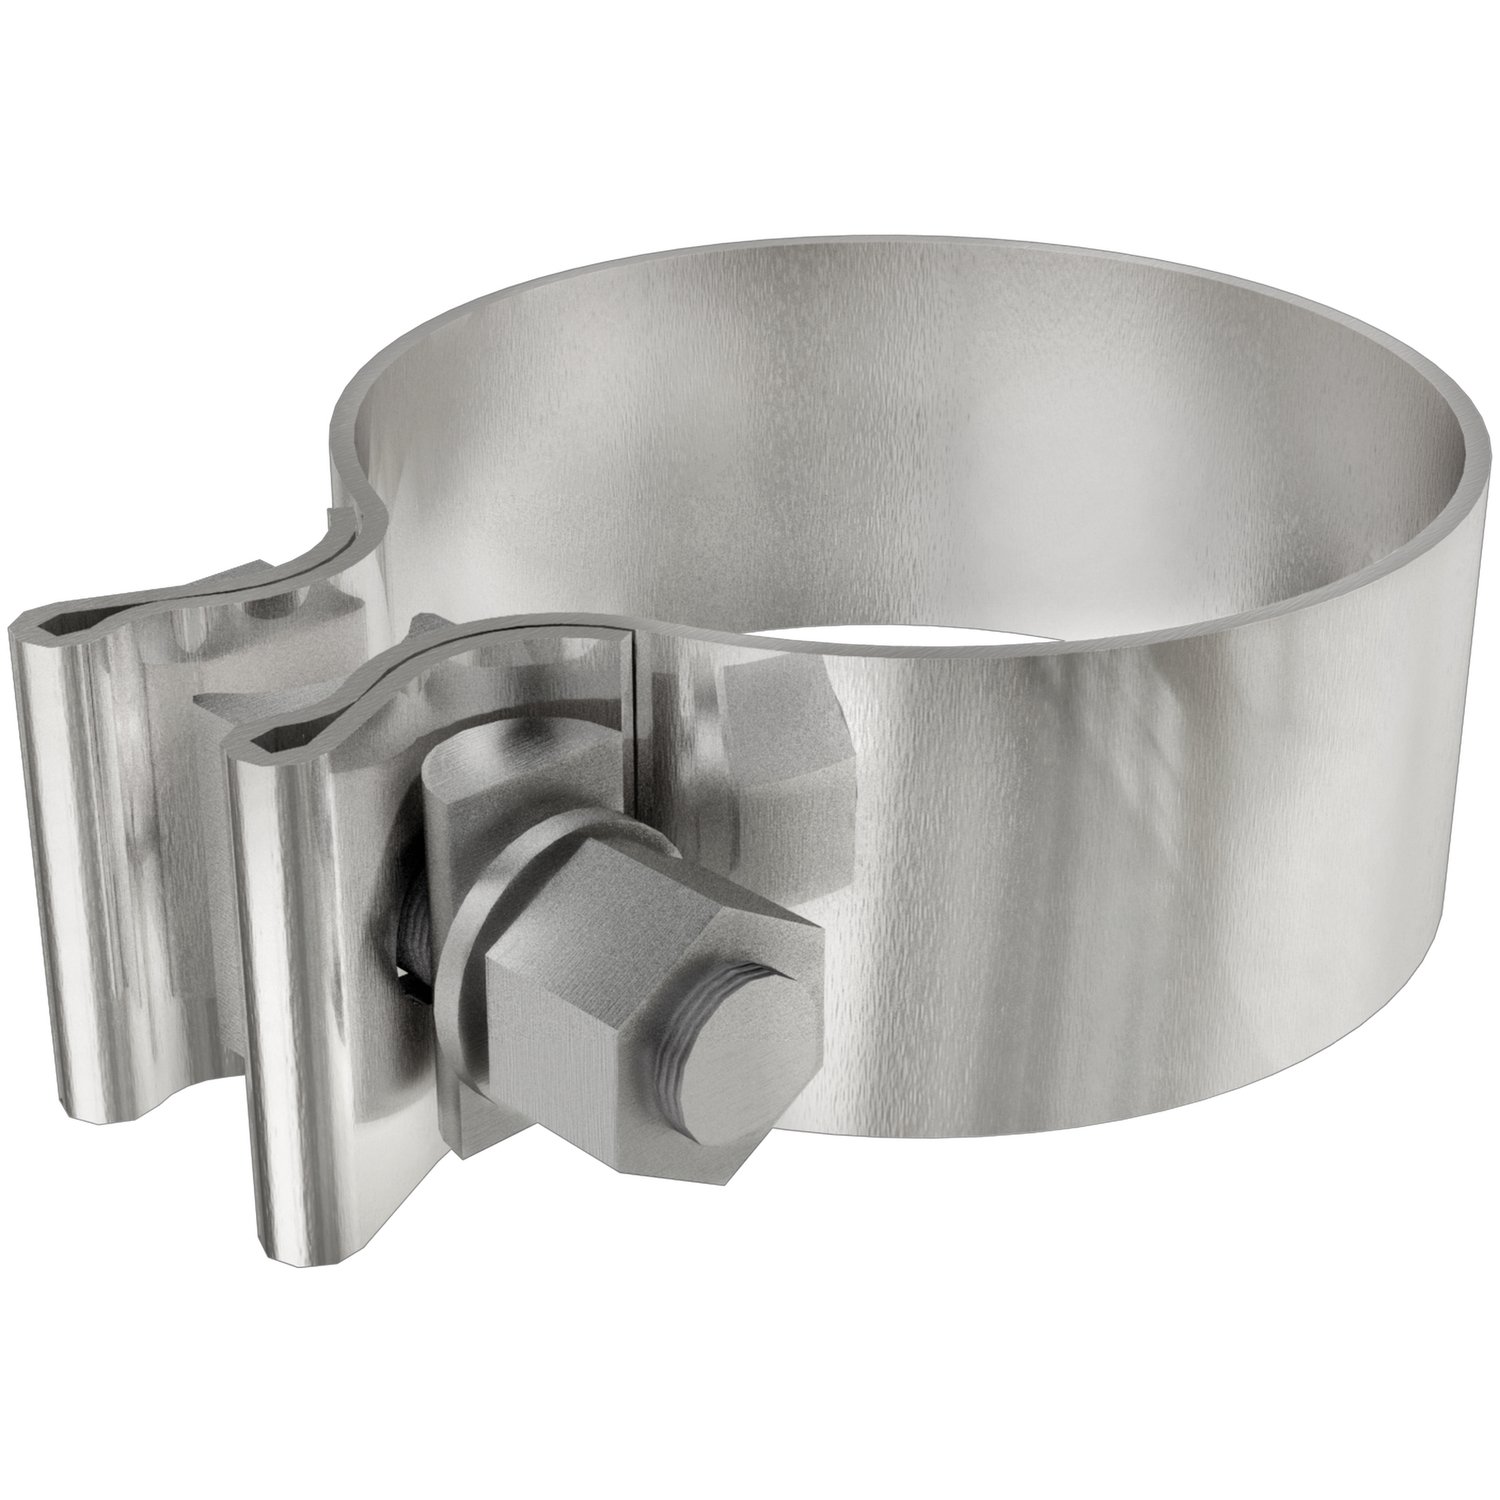 AccuSeal Stainless Steel Exhaust Band Clamps Clamp Diameter: 2.75"